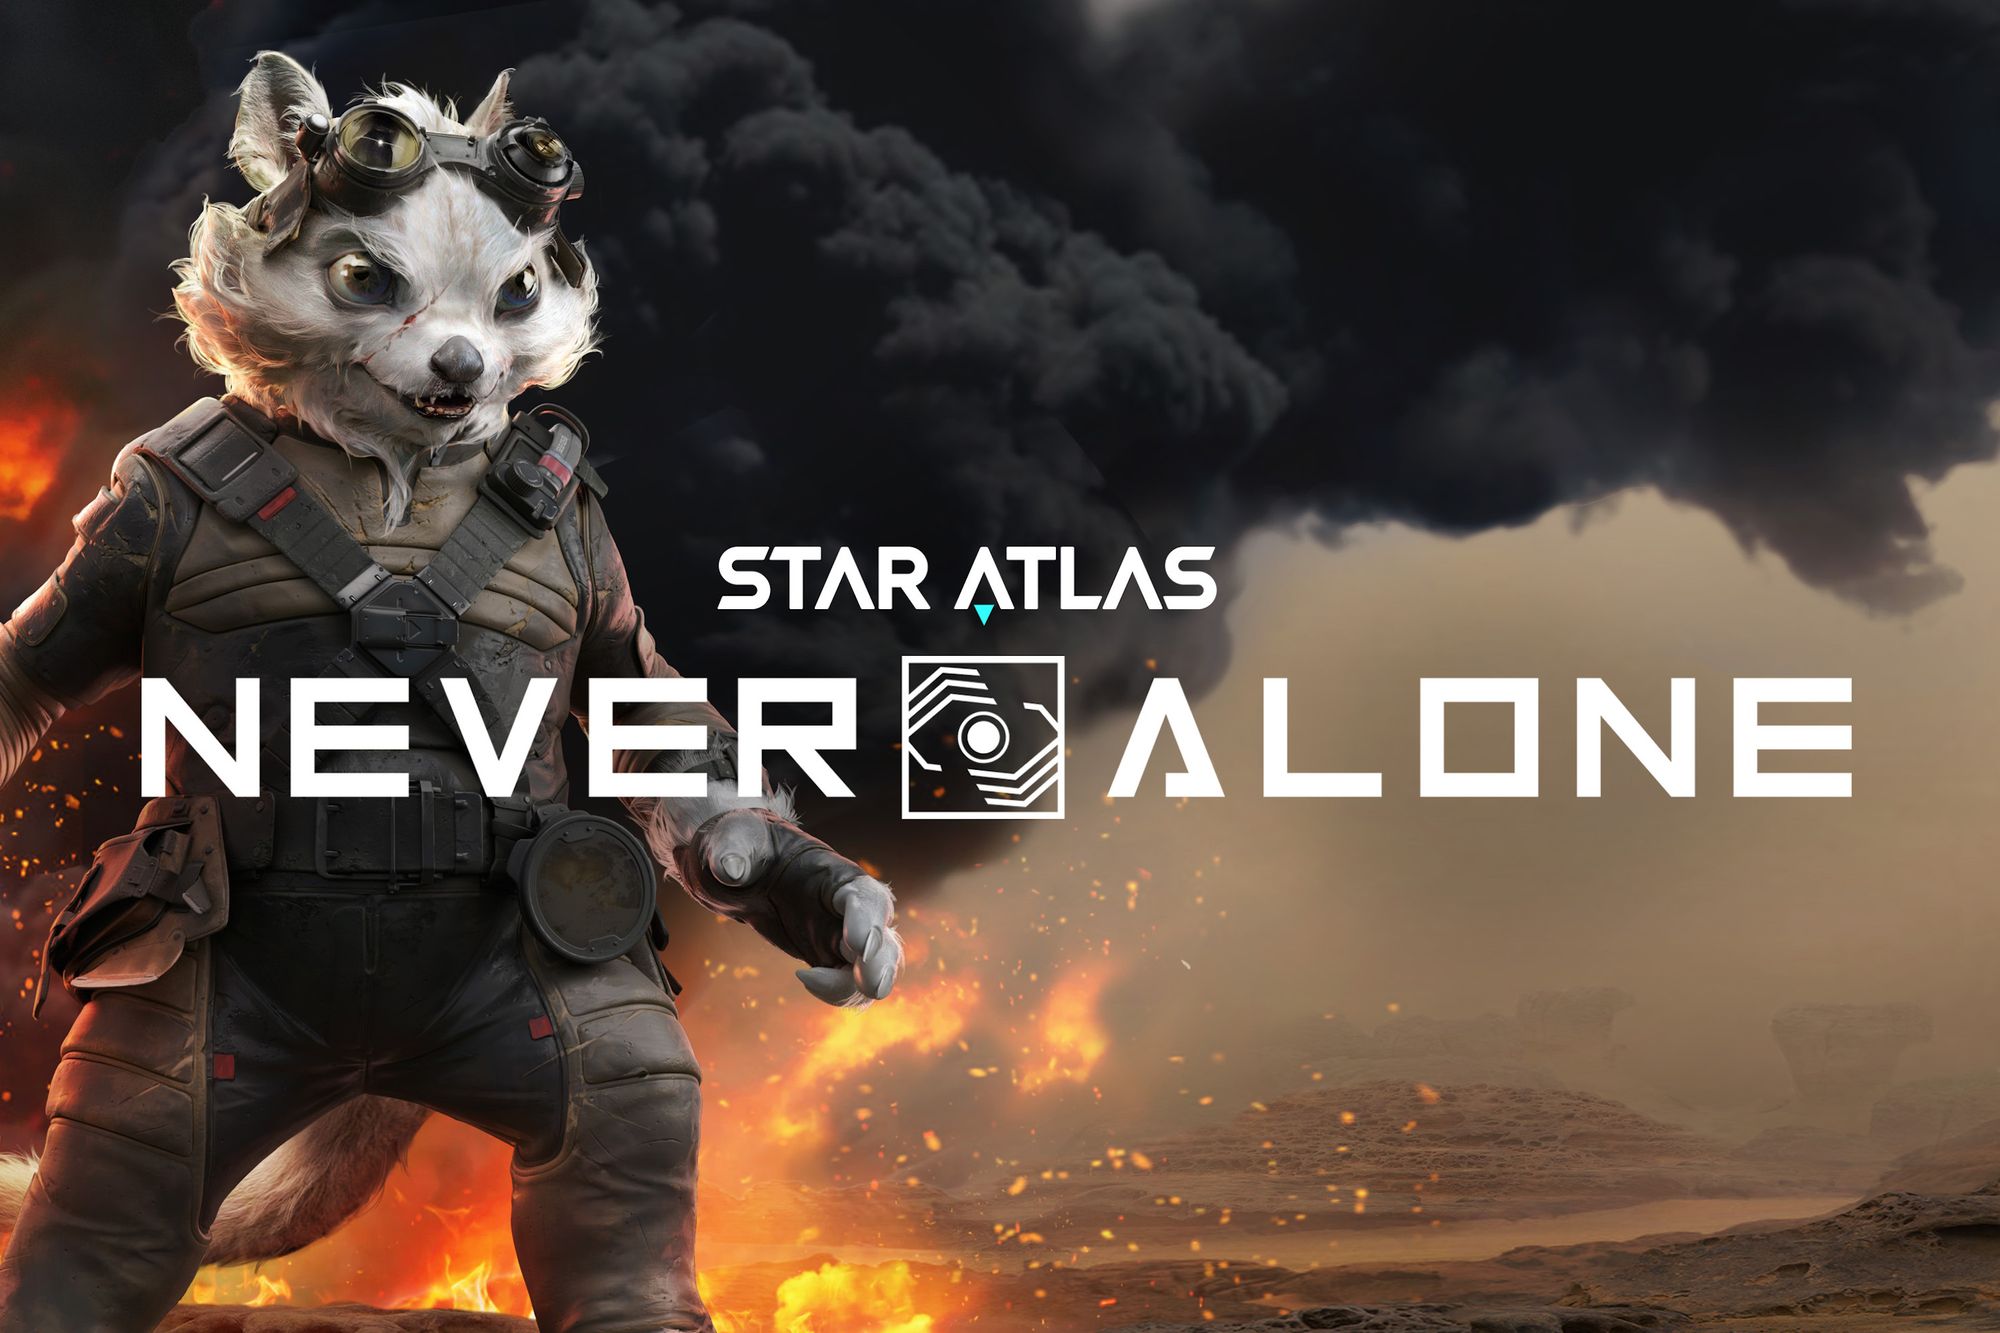 Star Atlas' "Never Alone": An Immersive Journey of Friendship and Discovery